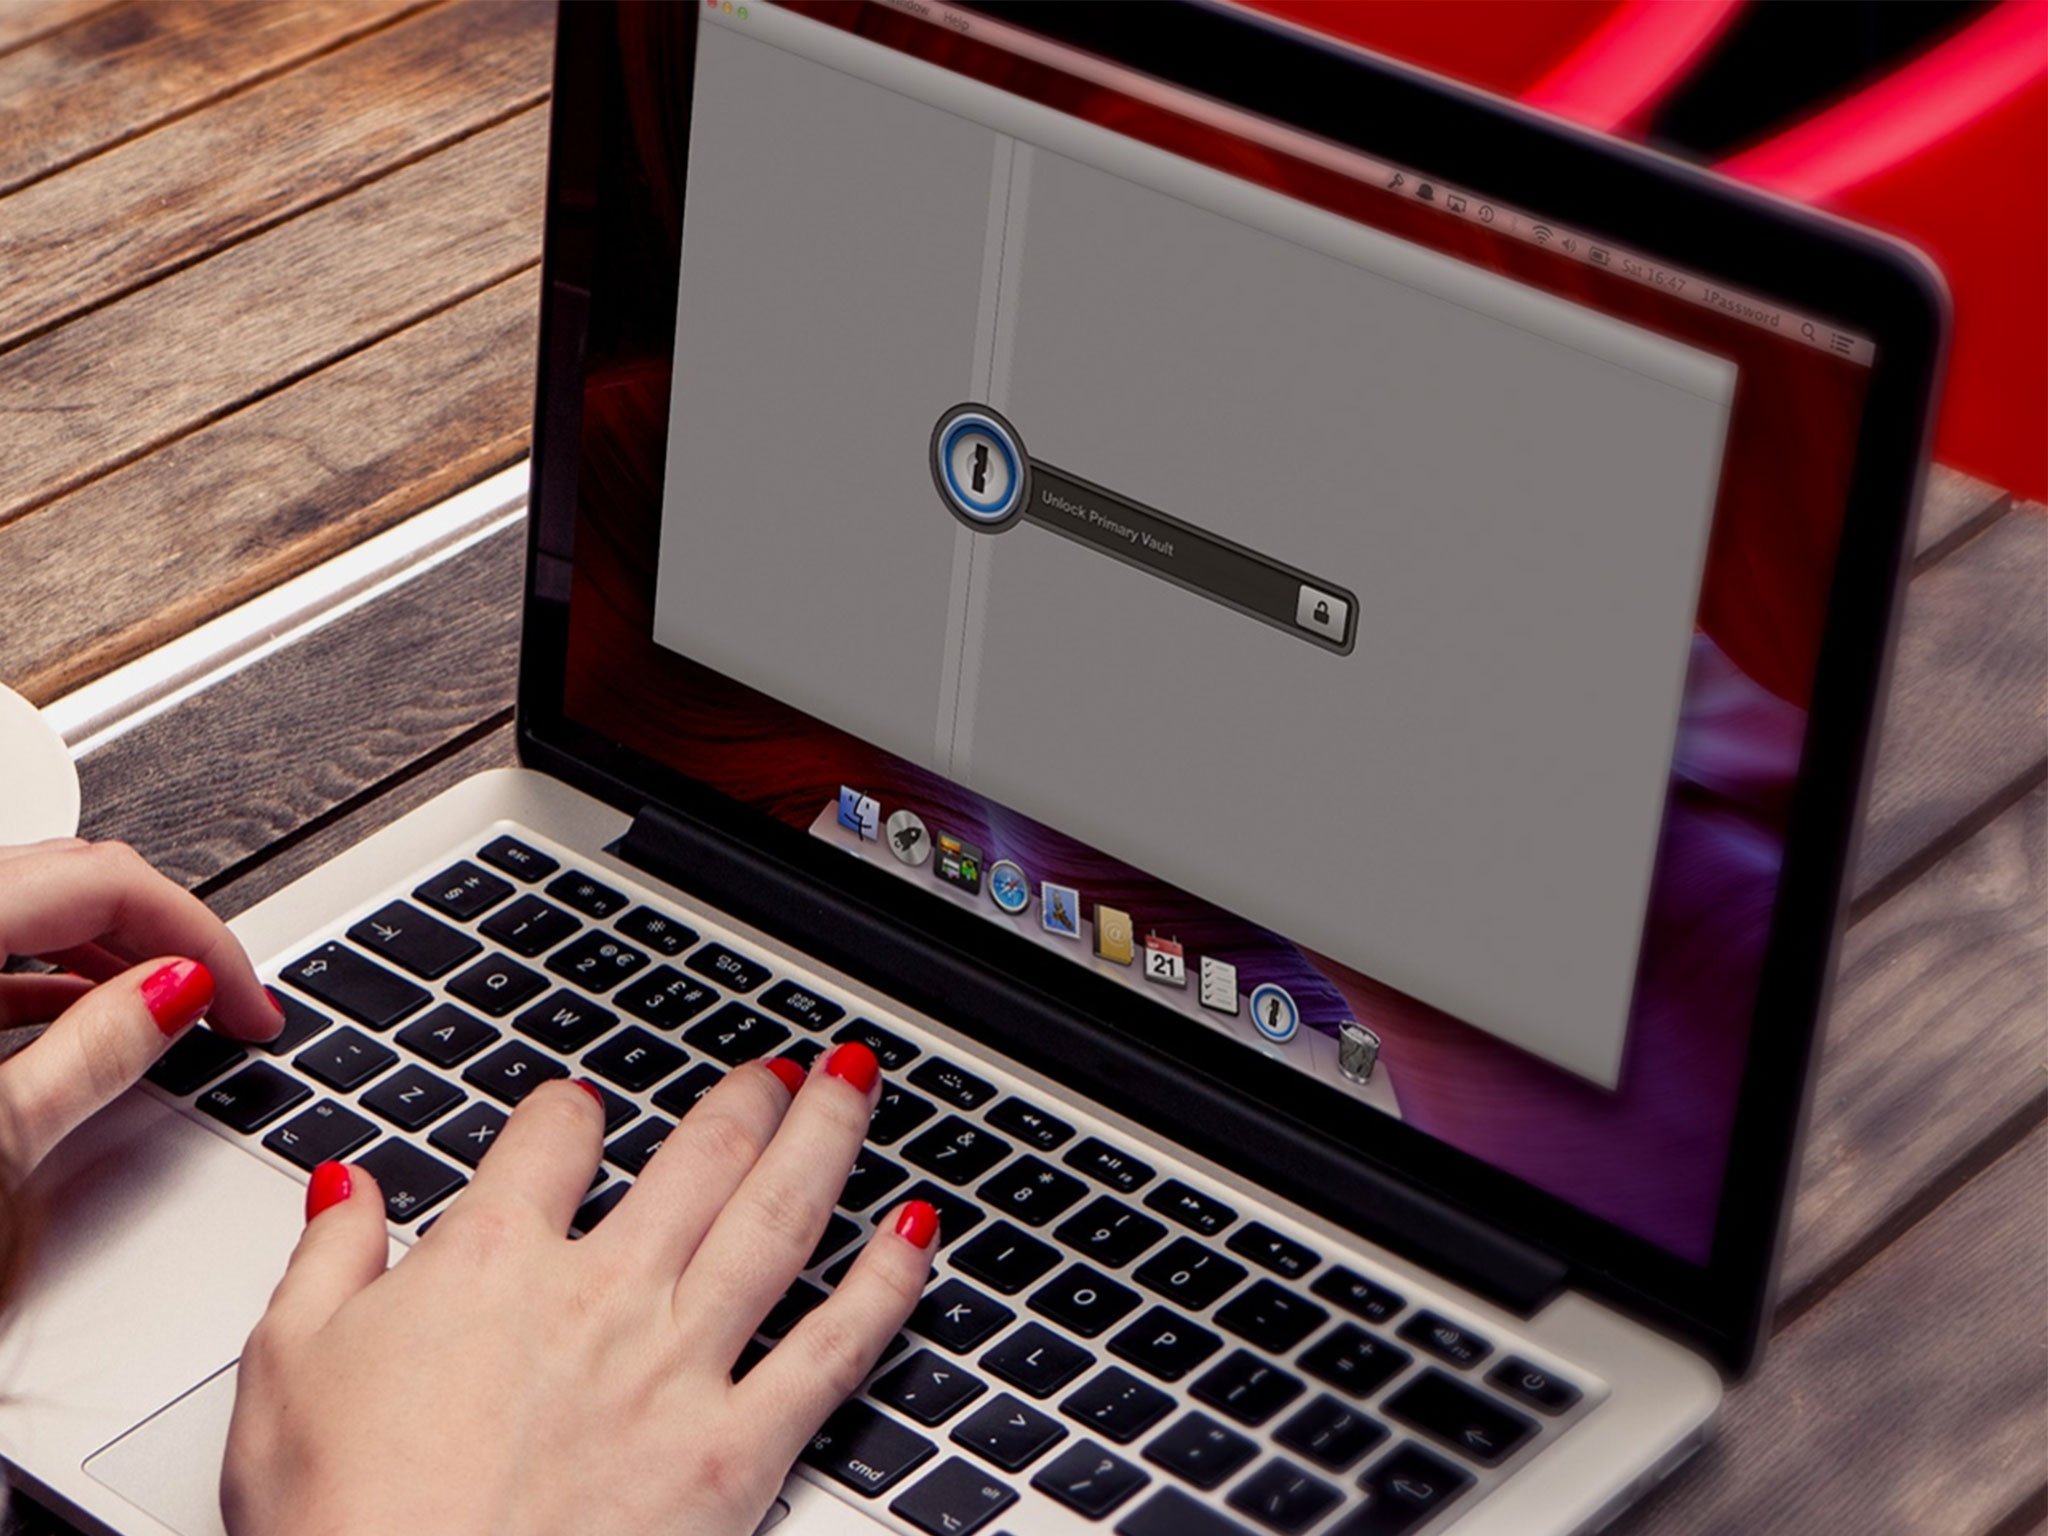 1Password 4 for Mac now available with new interface, 1Password mini, shared items, Wi-Fi sync, and more!